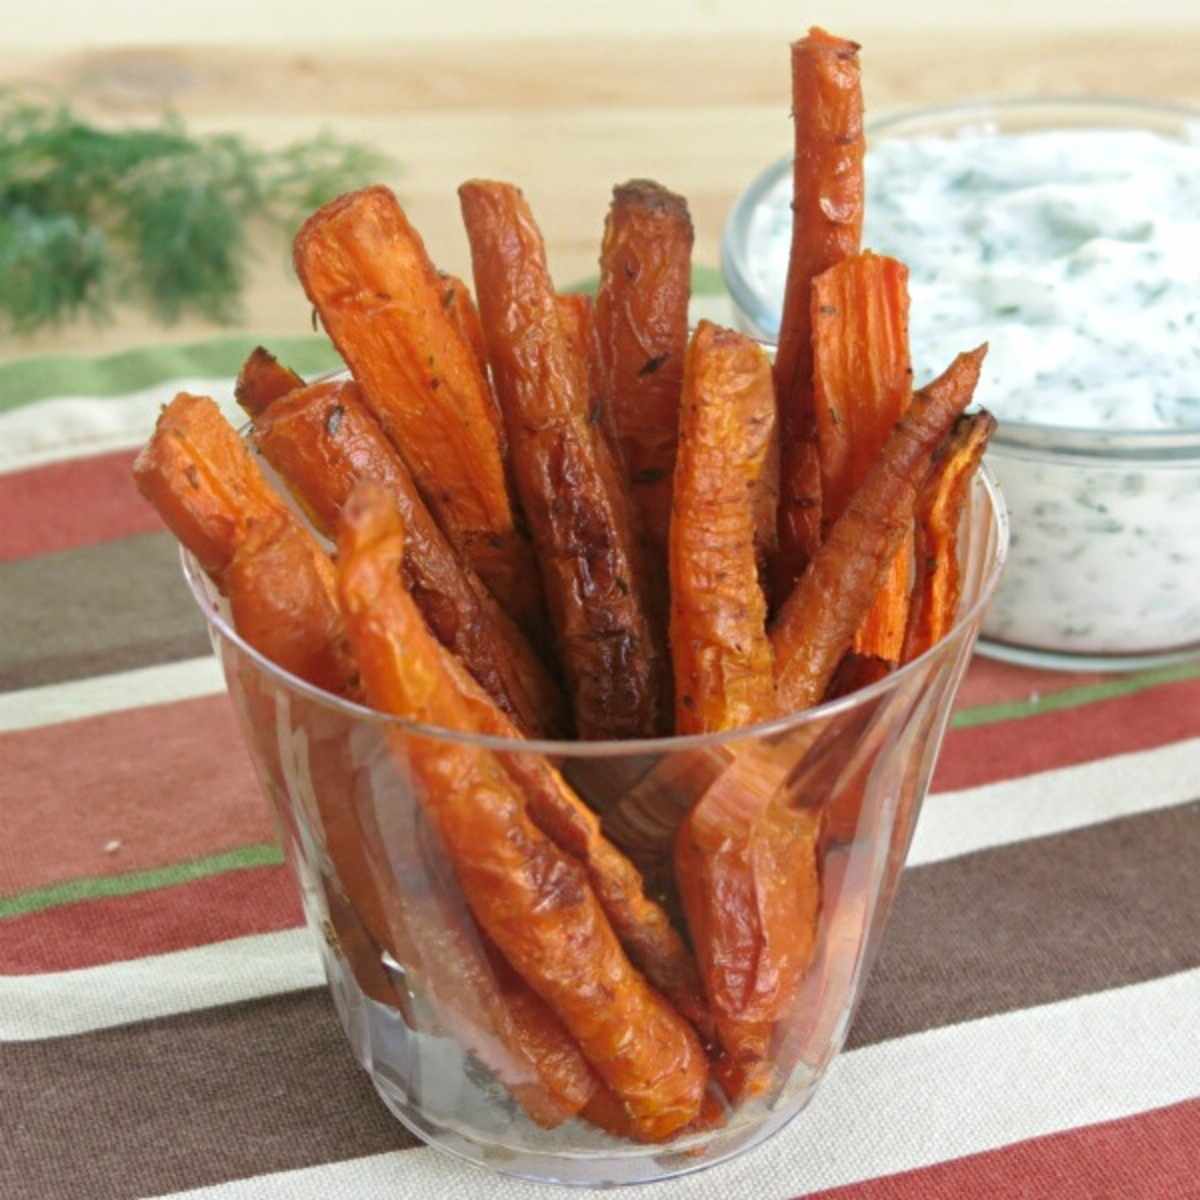 Carrot fries in a container with yogurt dipping sauce behind it.